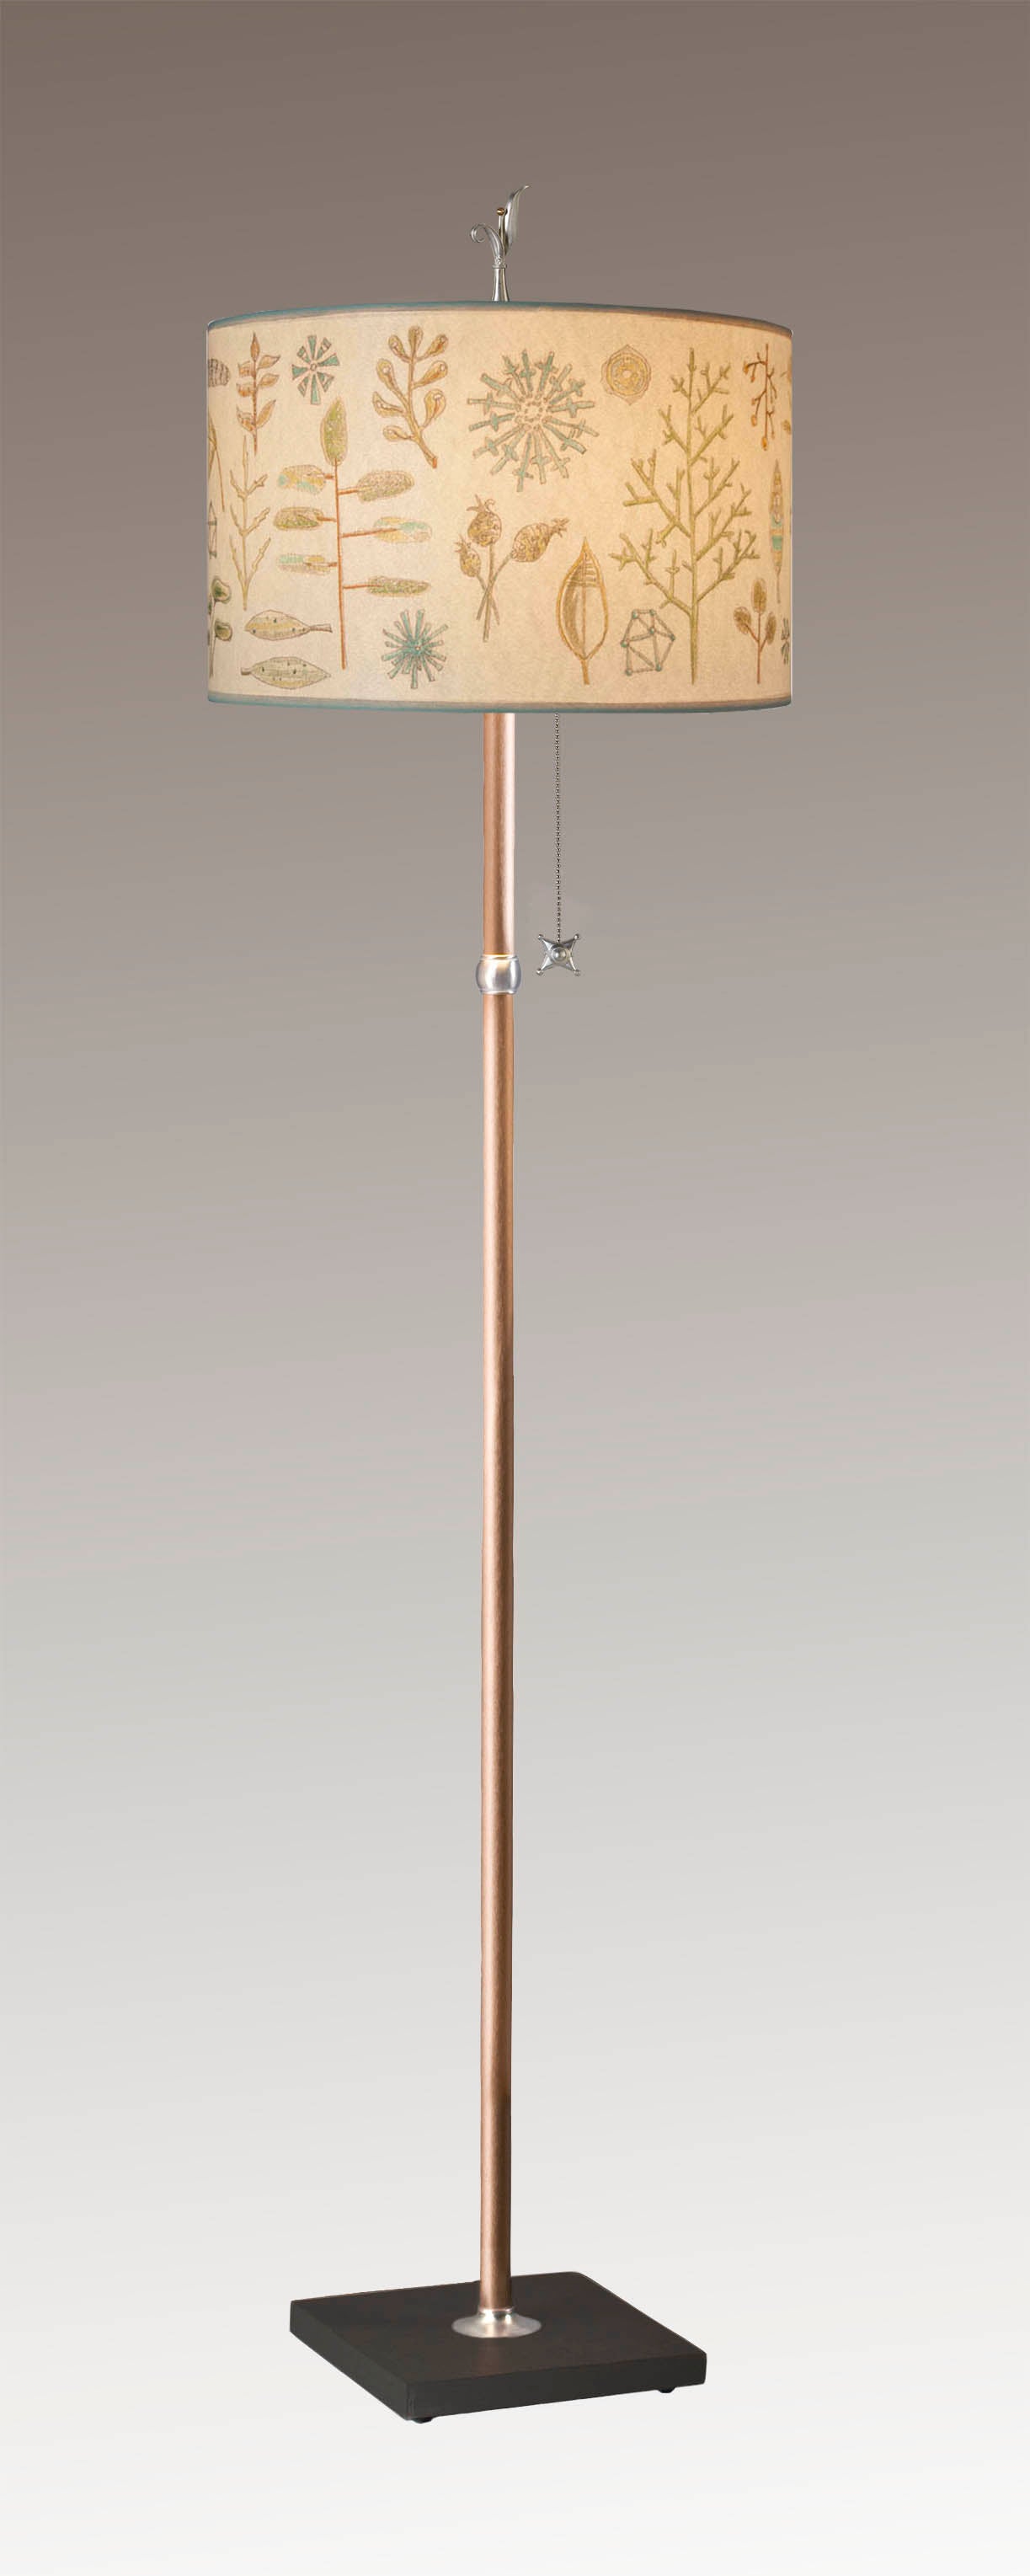 Janna Ugone & Co Floor Lamp Copper Floor Lamp with Large Drum Shade in Field Chart